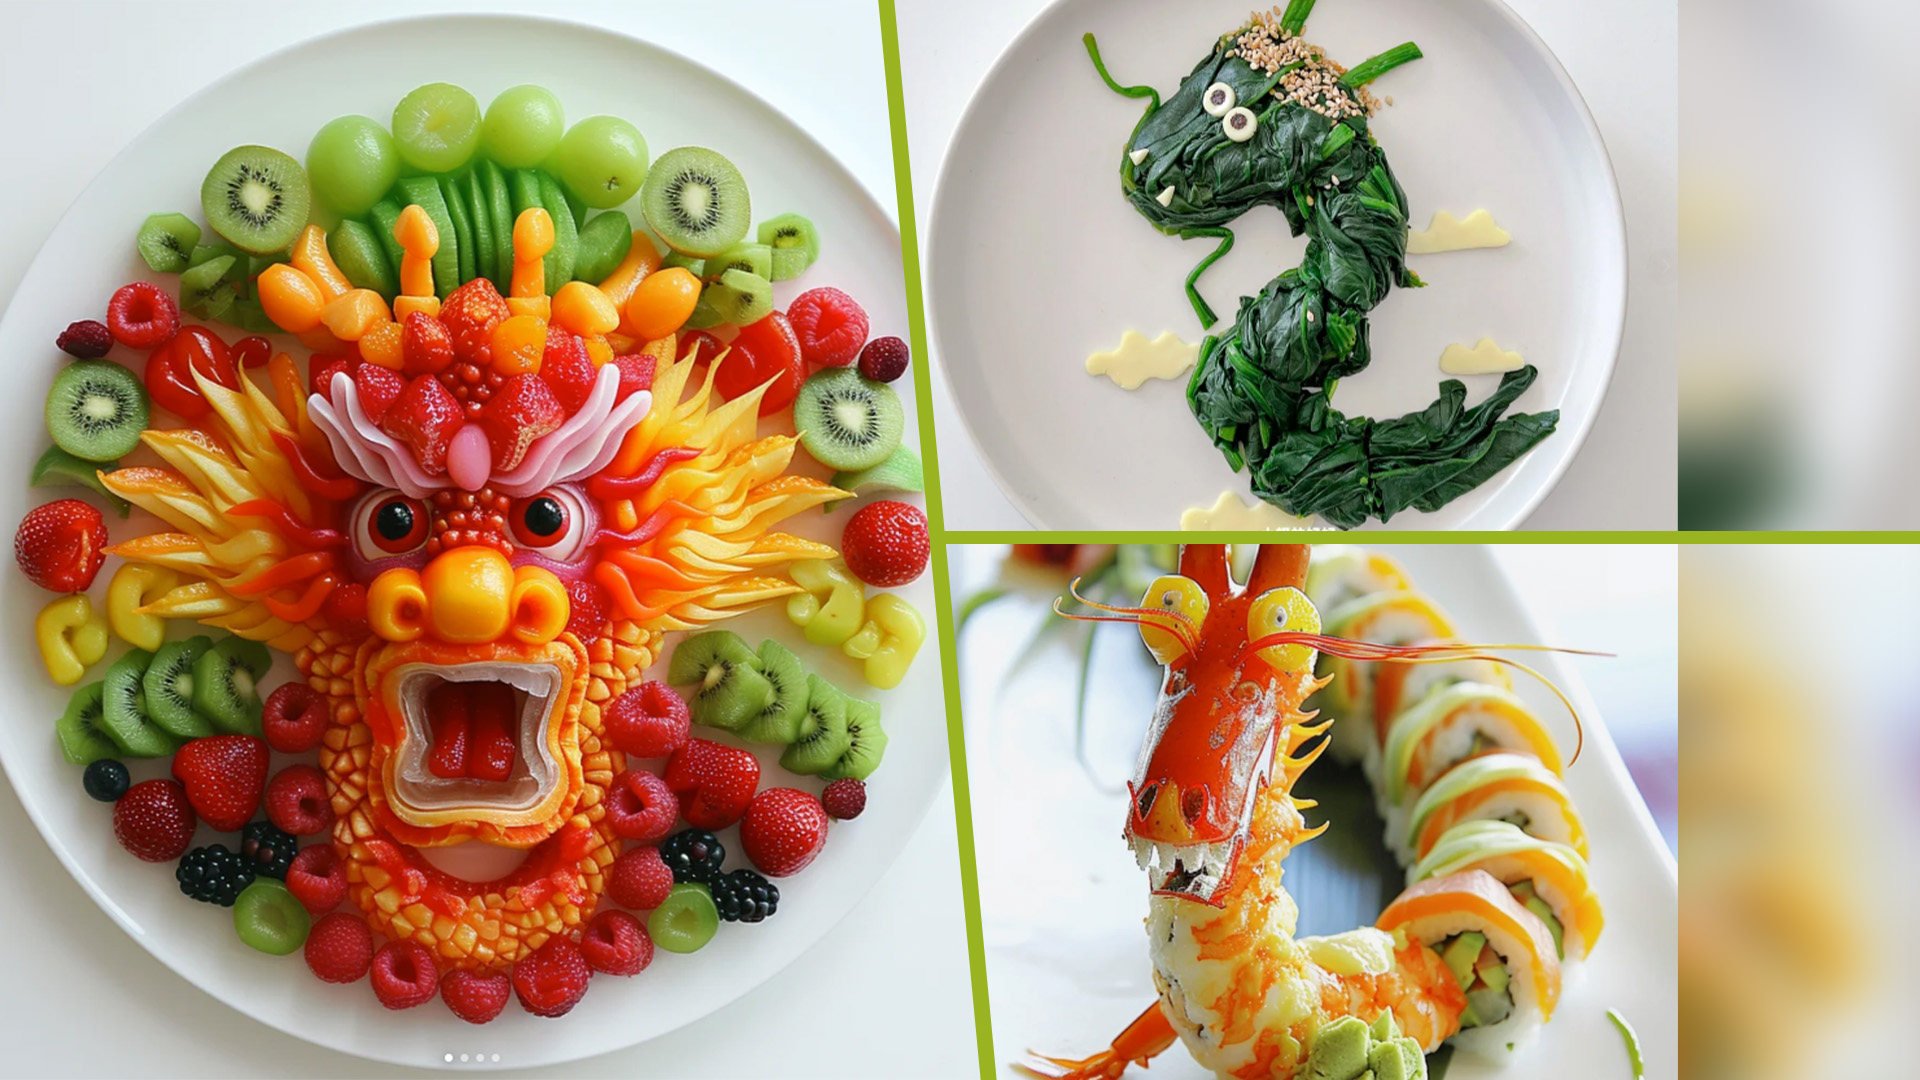 As the Year of the Dragon stretches out before us, mainland social media has been filled with images of delicious, and auspicious, culinary creations made by people depicting the much celebrated mythical creature. Photo: SCMP composite/Xiaohongshu